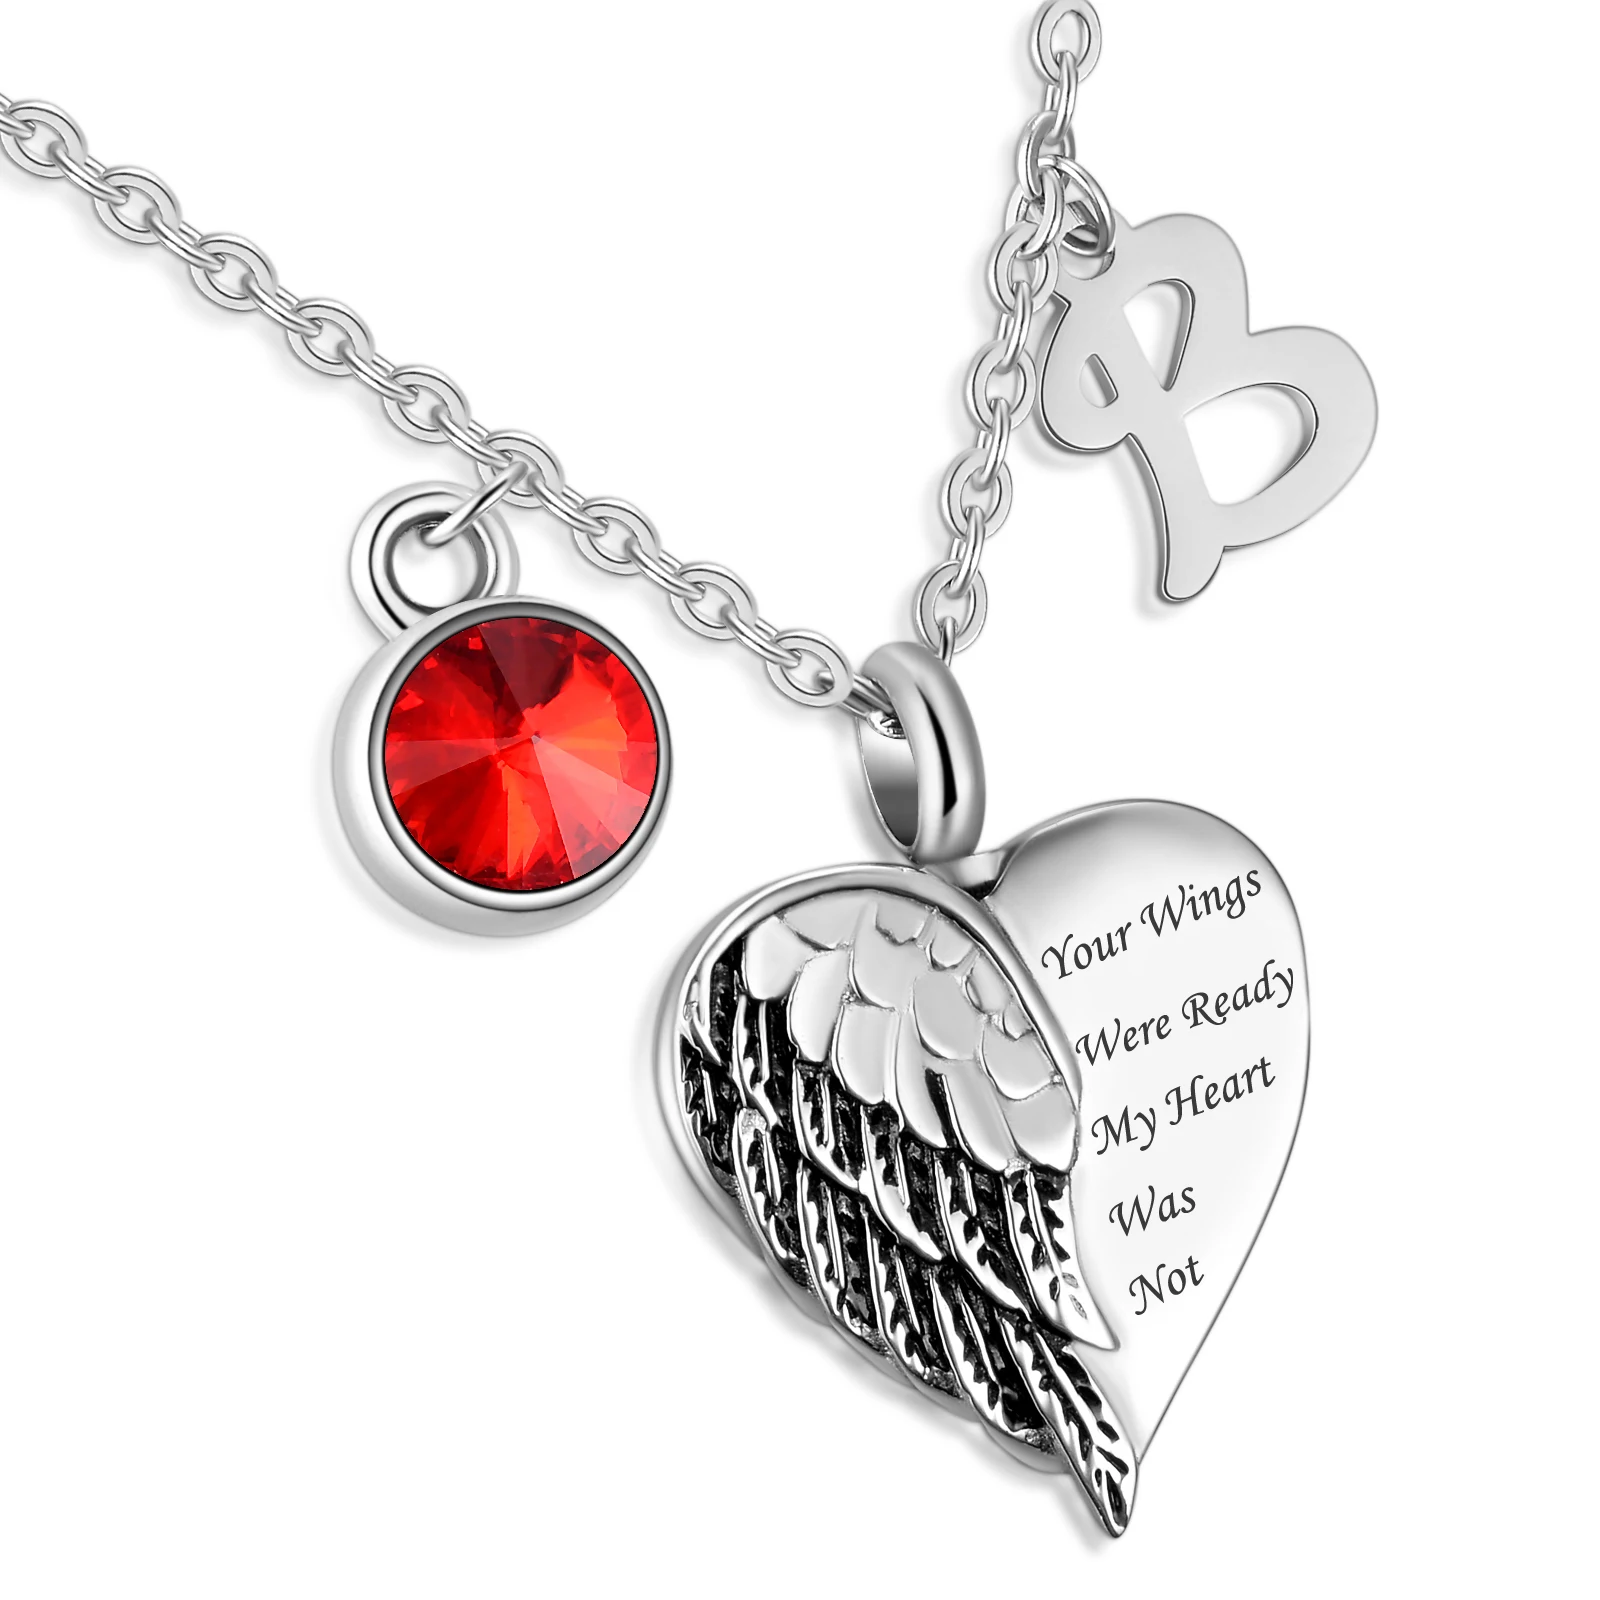 

Stainless Steel Your wings were ready my heart was not cremation necklace memorial ashes urn fashion jewelry keepsake pendant